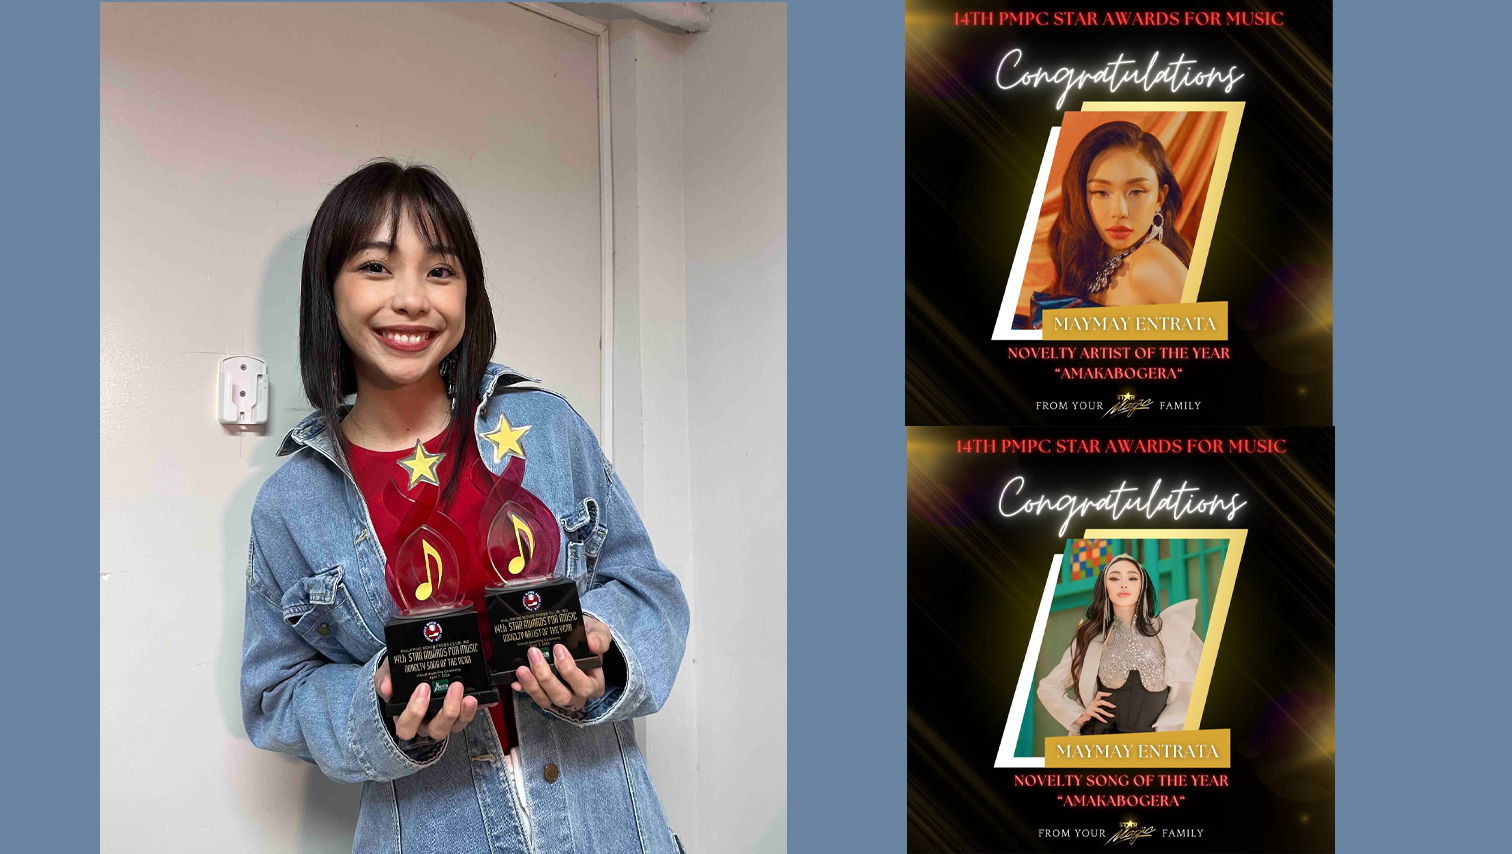 Maymay Entrata double win at 14th PMPC Star Awards for Music for “Amakabogera”